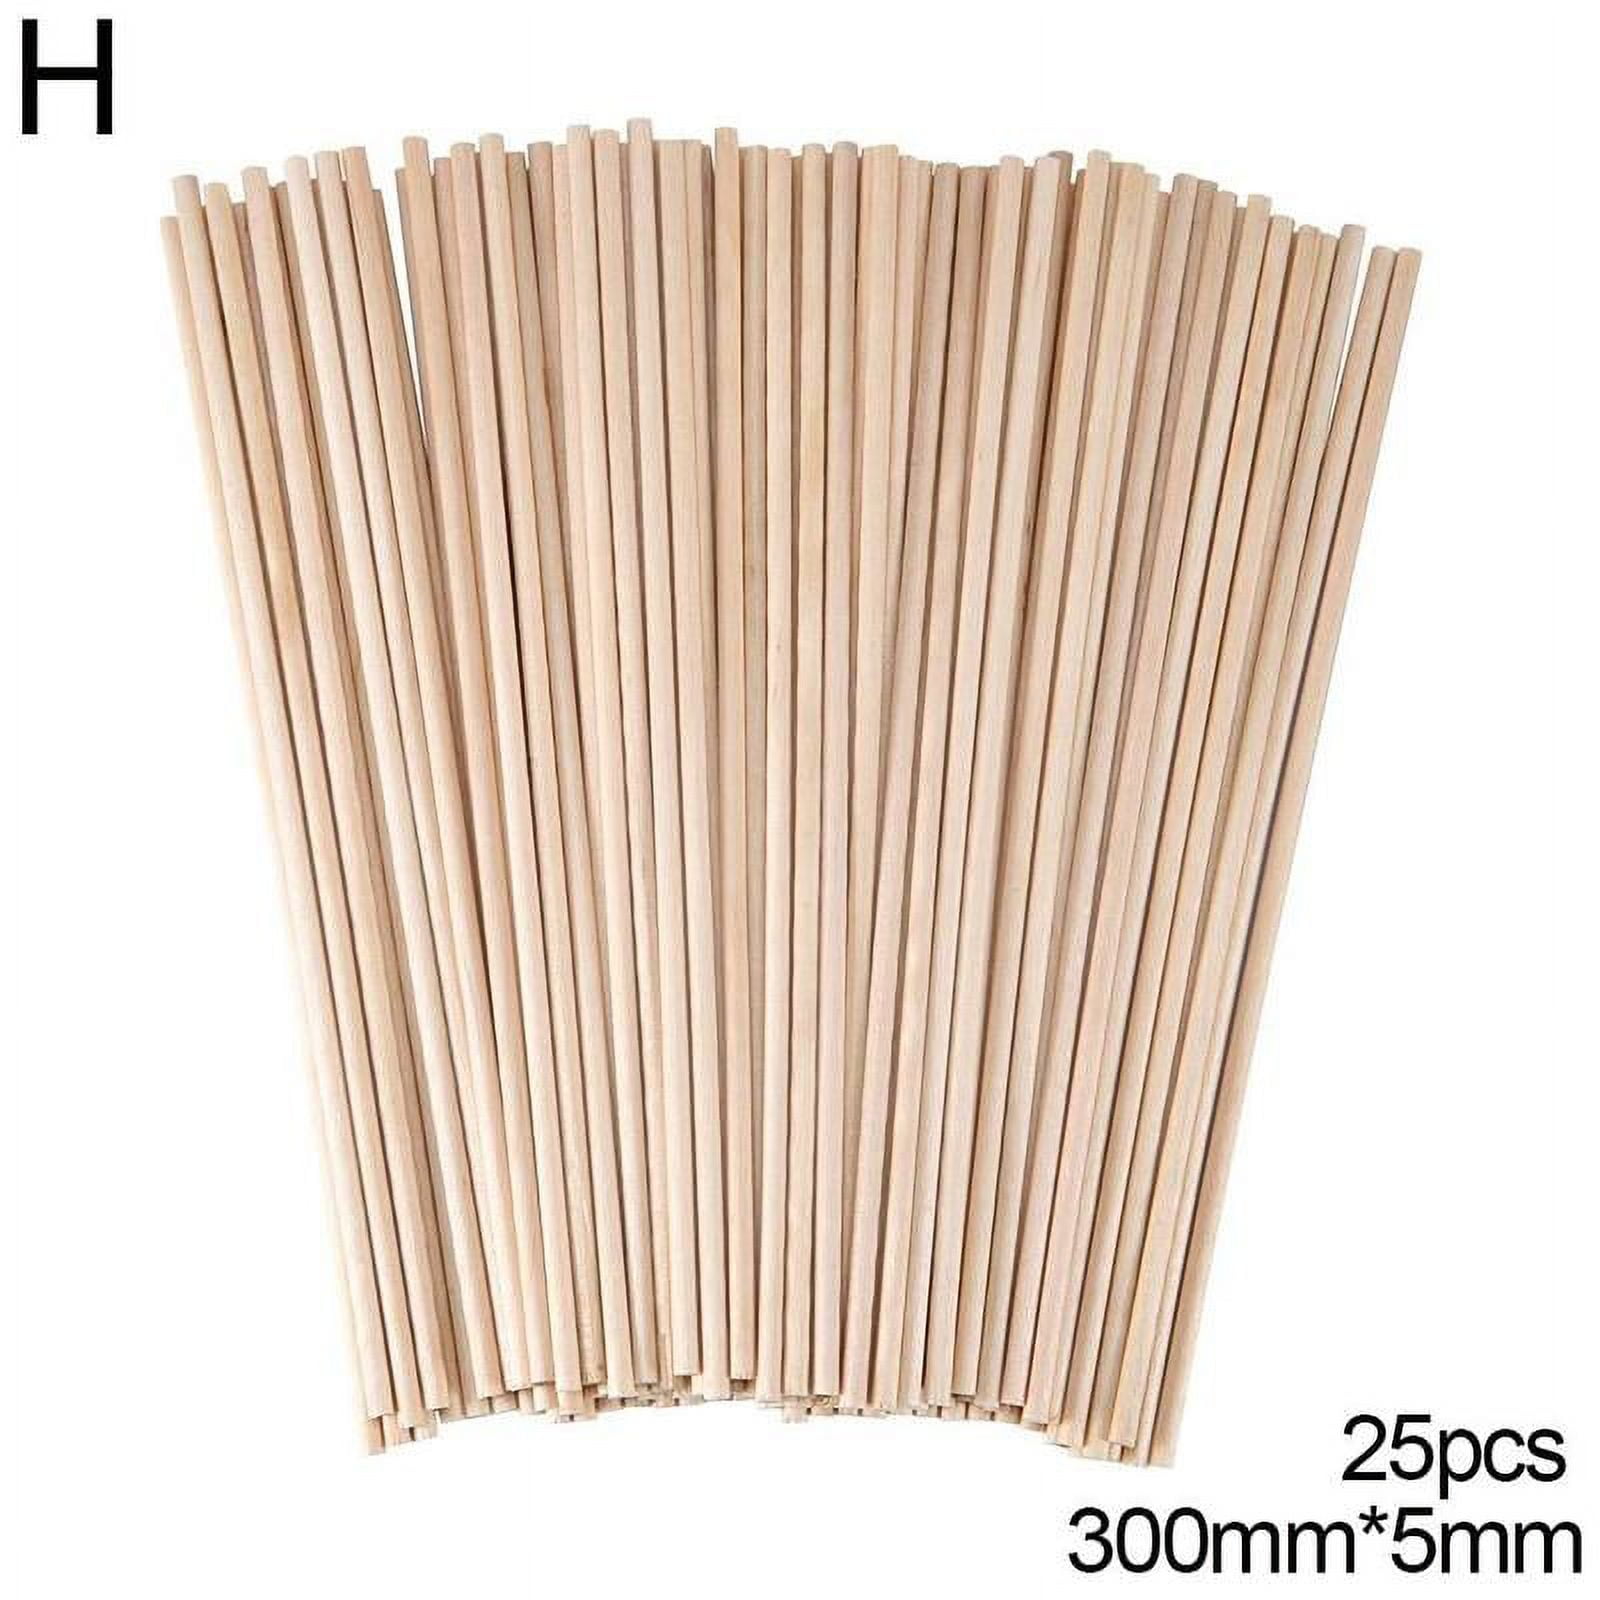 Dowels - 300mm (12 in.) x 5mm